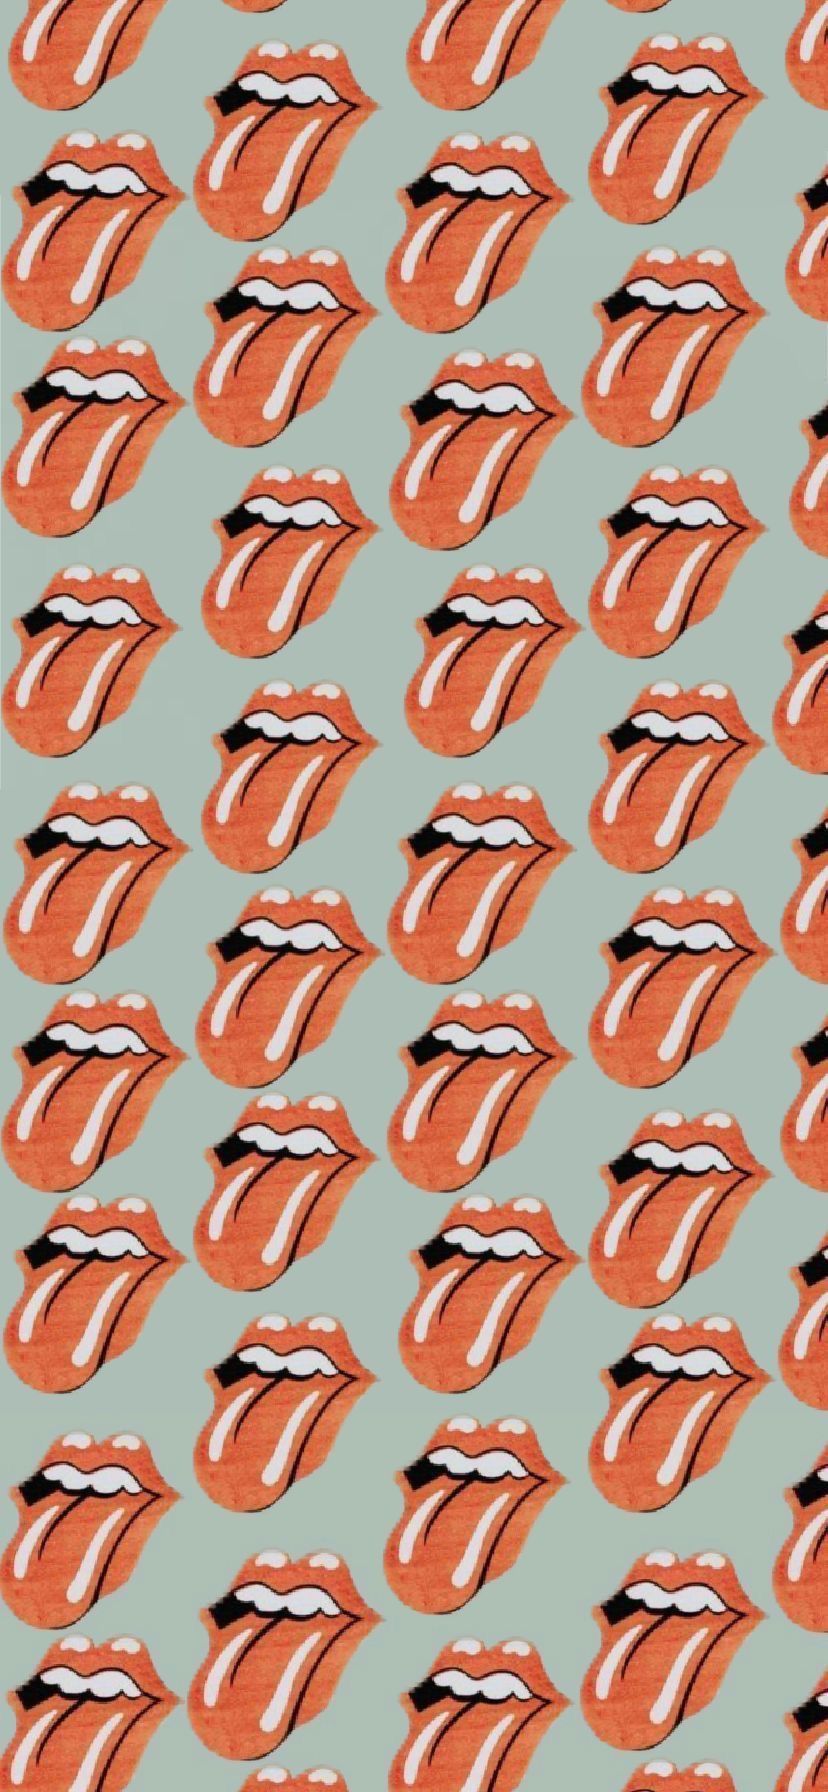 rock and roll tongue wallpaper. iPhone wallpaper vintage, Wallpaper iphone cute, Edgy wallpaper